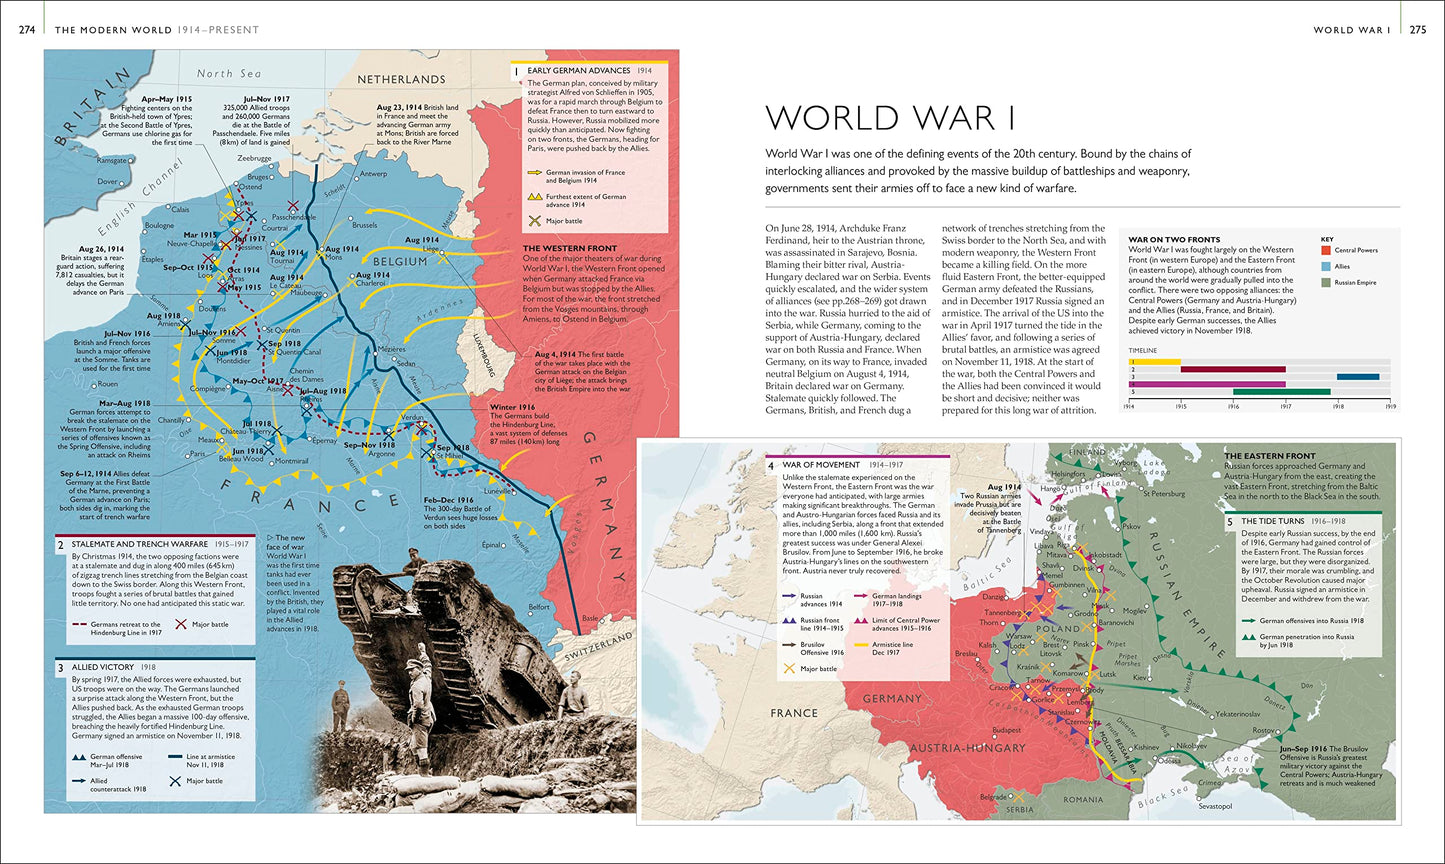 History of the World Map by Map (DK History Map by Map)